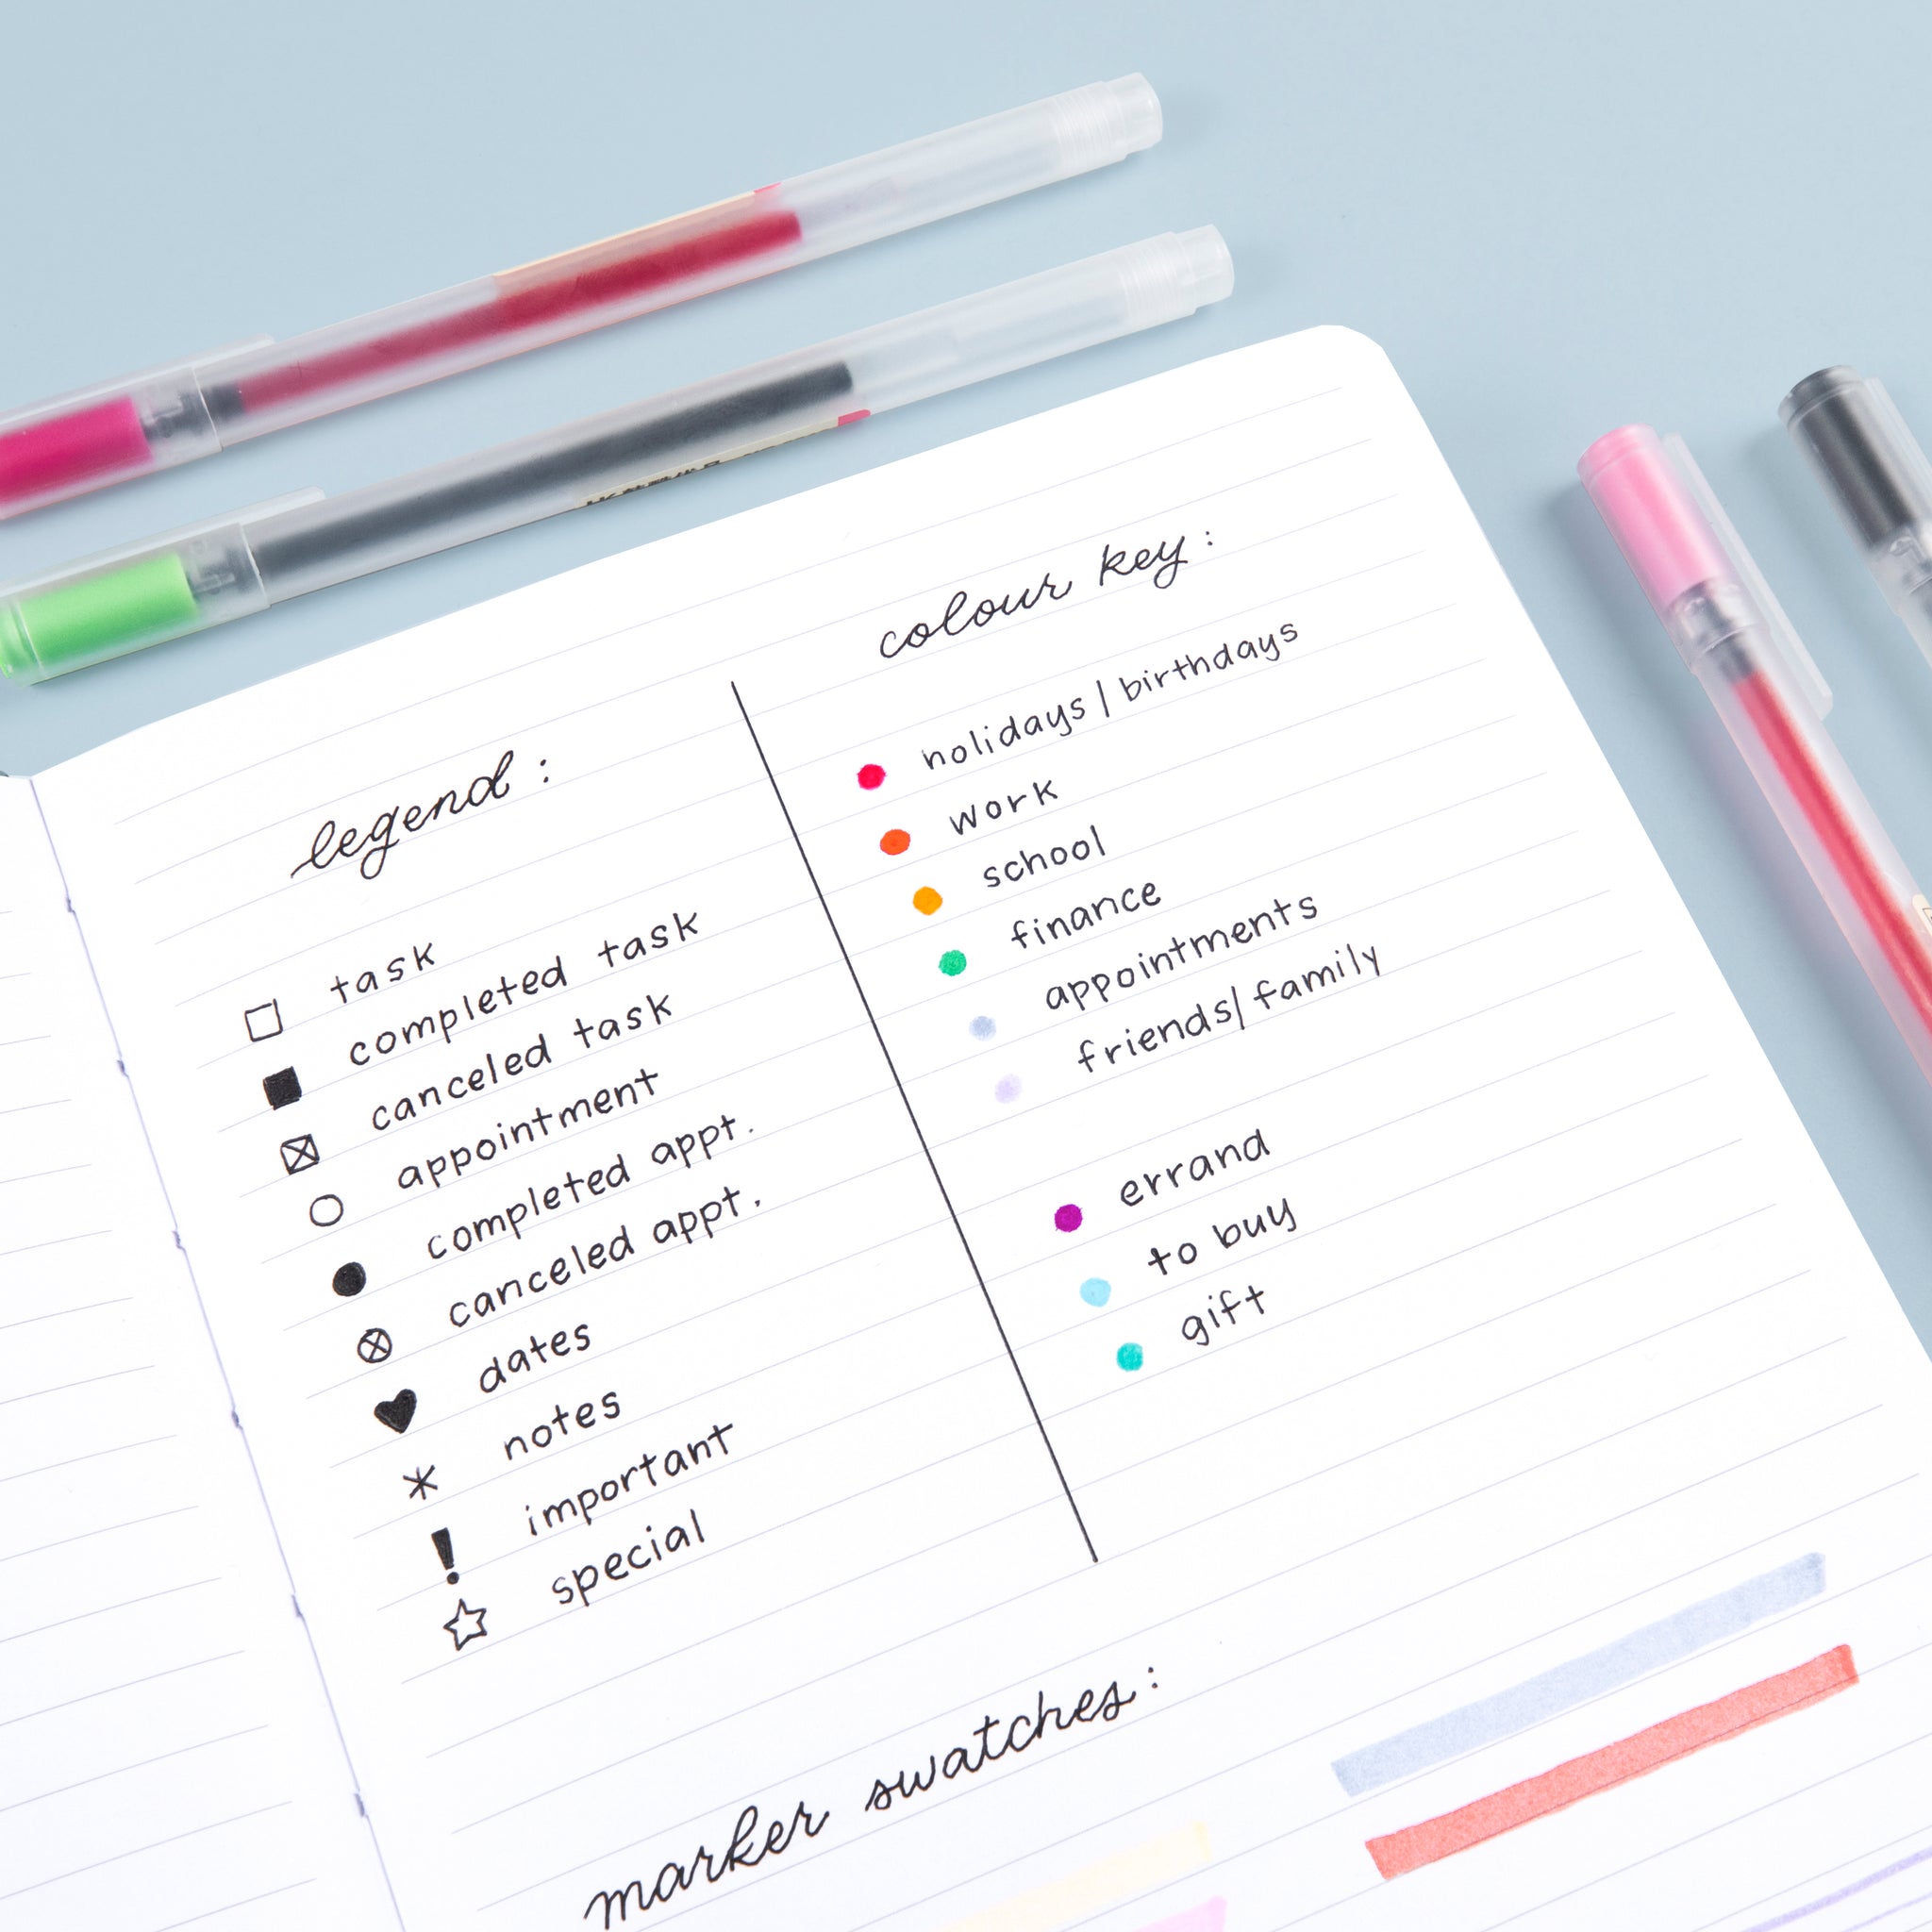 6 Best Pens for Bullet Journaling That Do NOT Bleed! - The Curious Planner